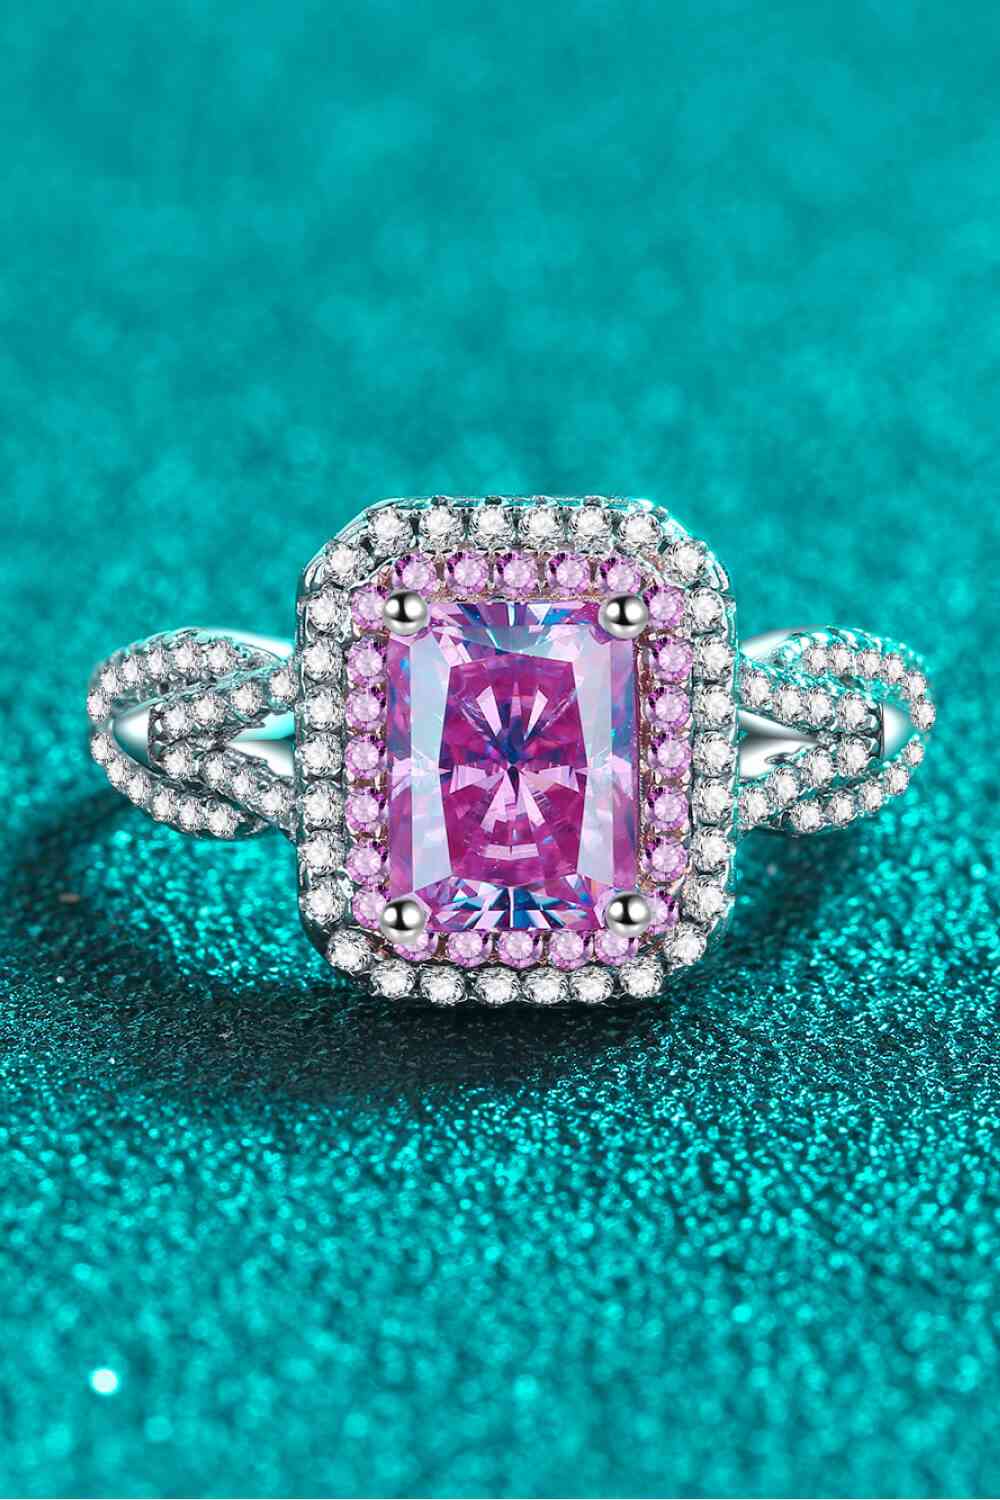 a fancy ring with a pink stone surrounded by diamonds